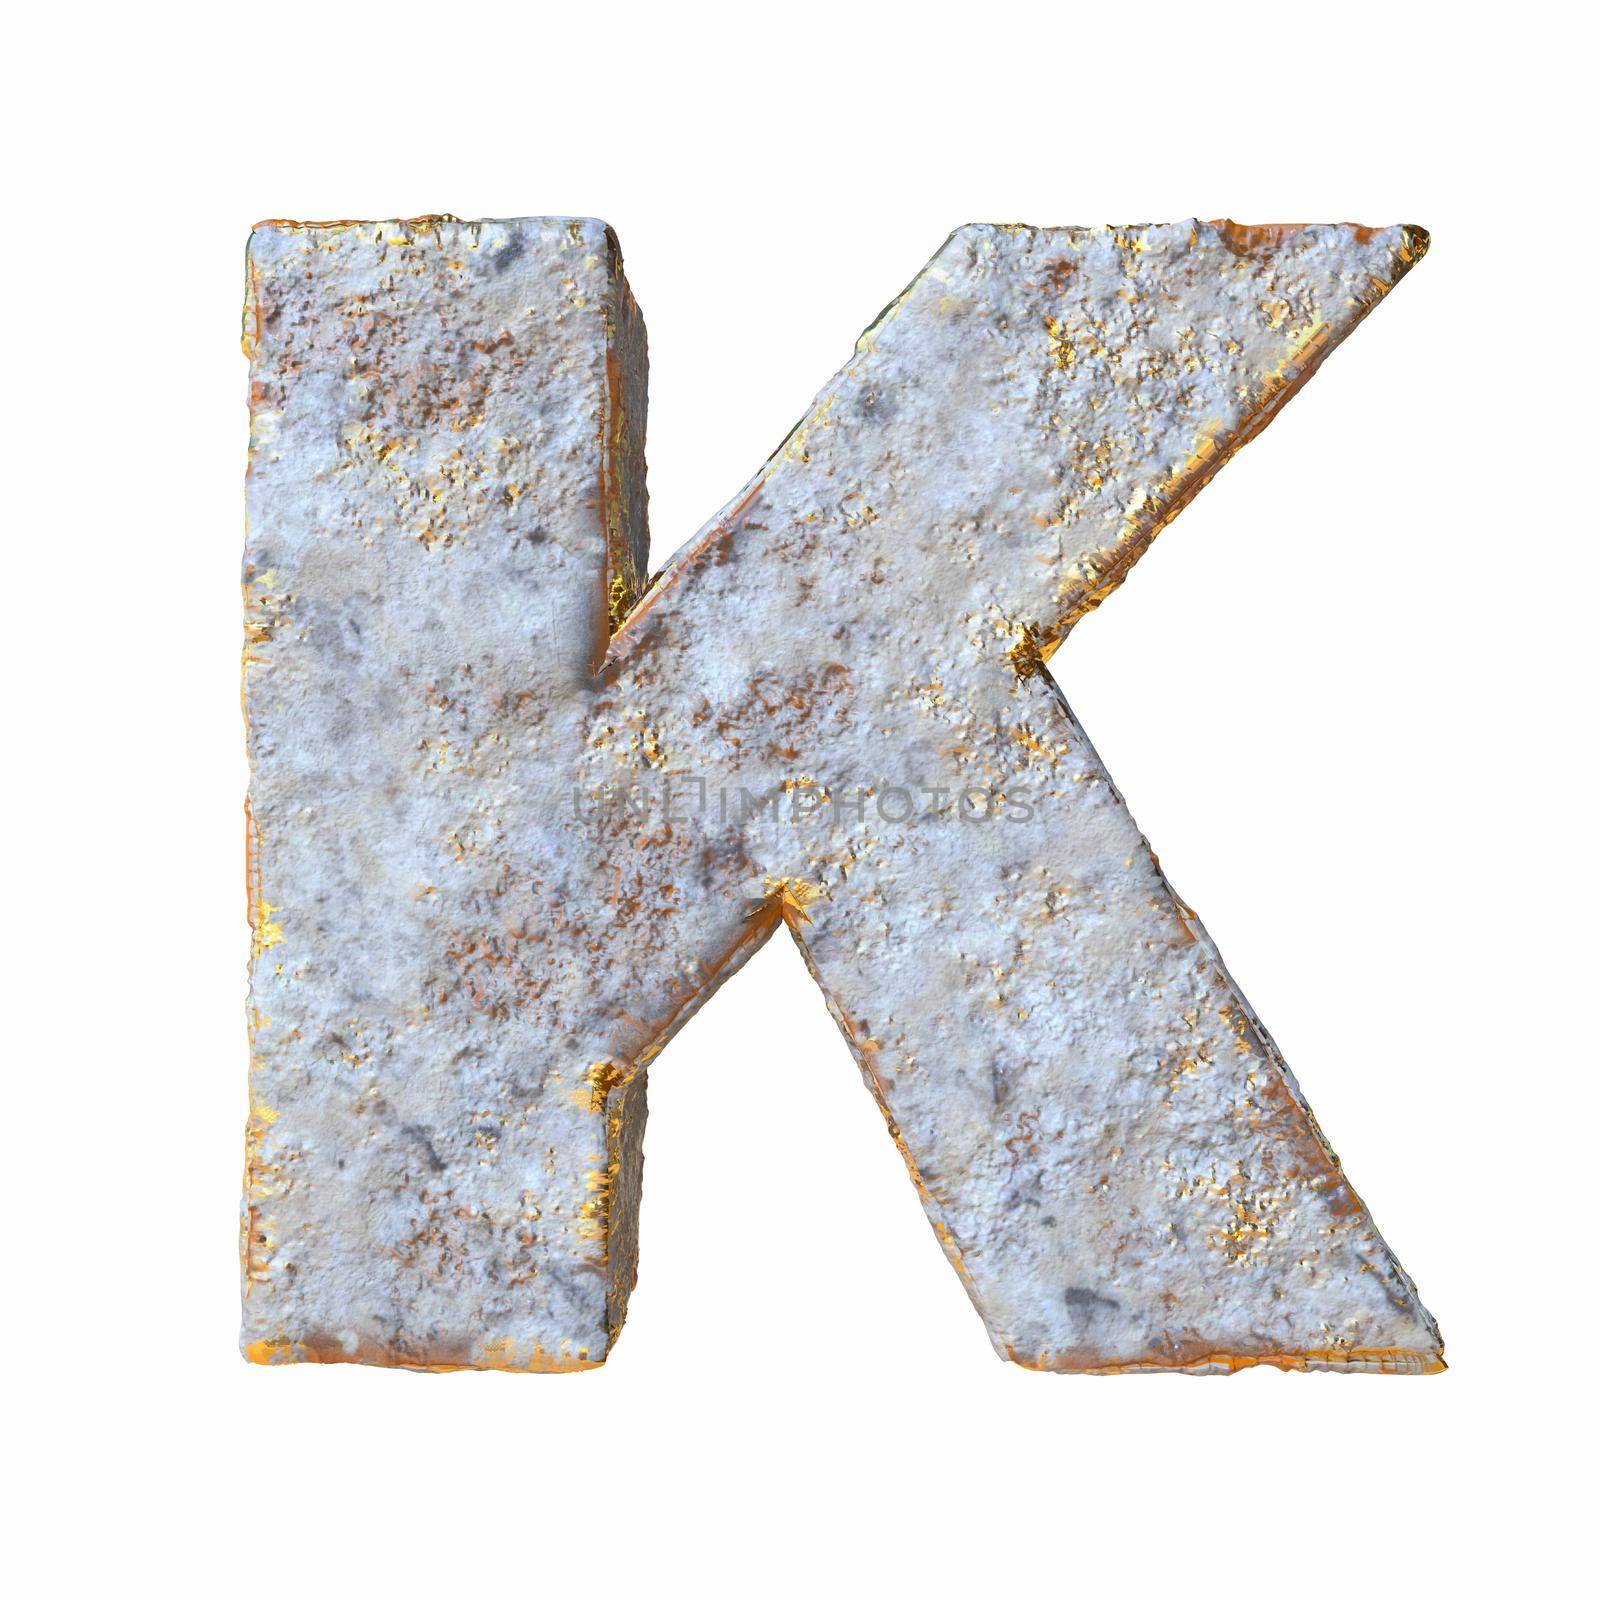 Stone with golden metal particles Letter K 3D rendering illustration isolated on white background